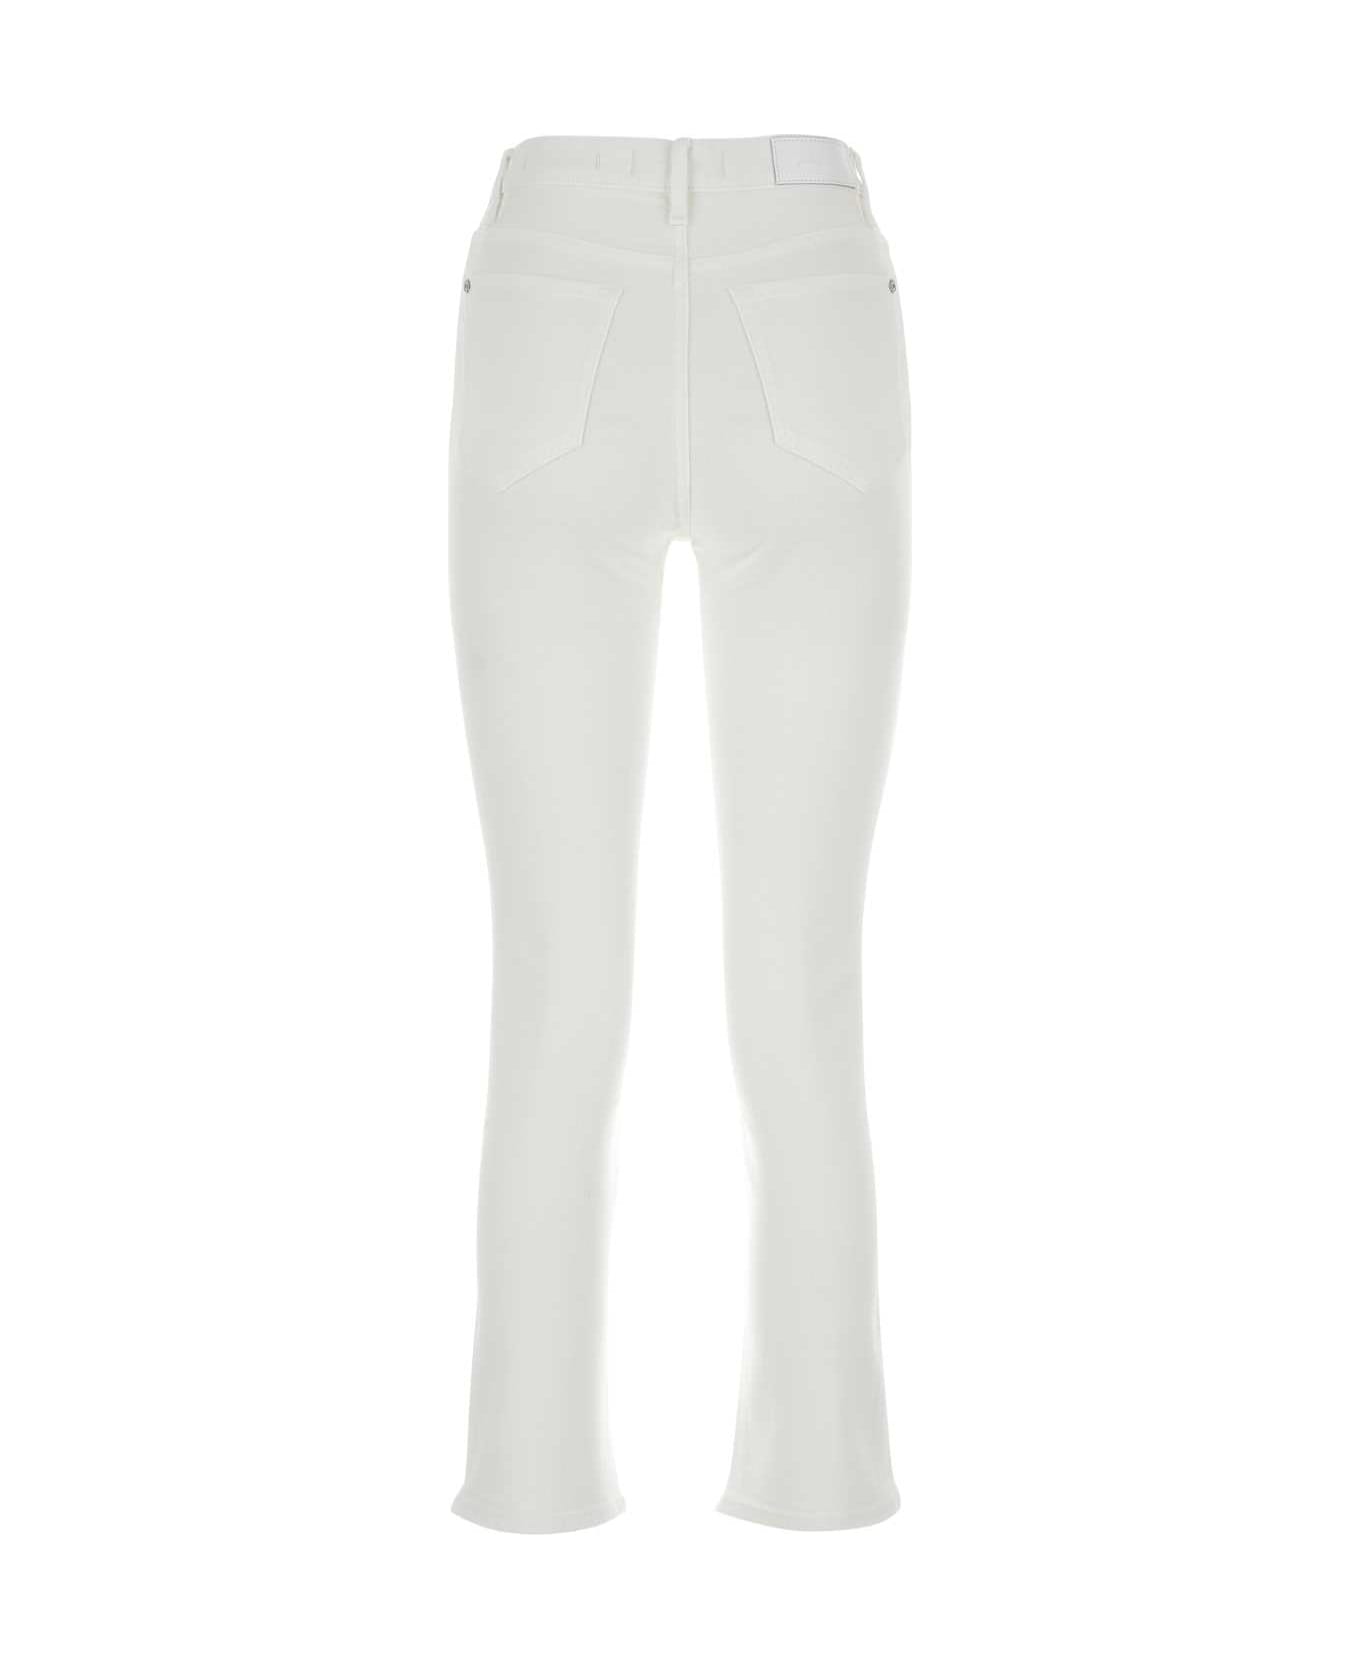 7 For All Mankind White Stretch Cotton Blend Luxe Vintage Jeans - BIANCO